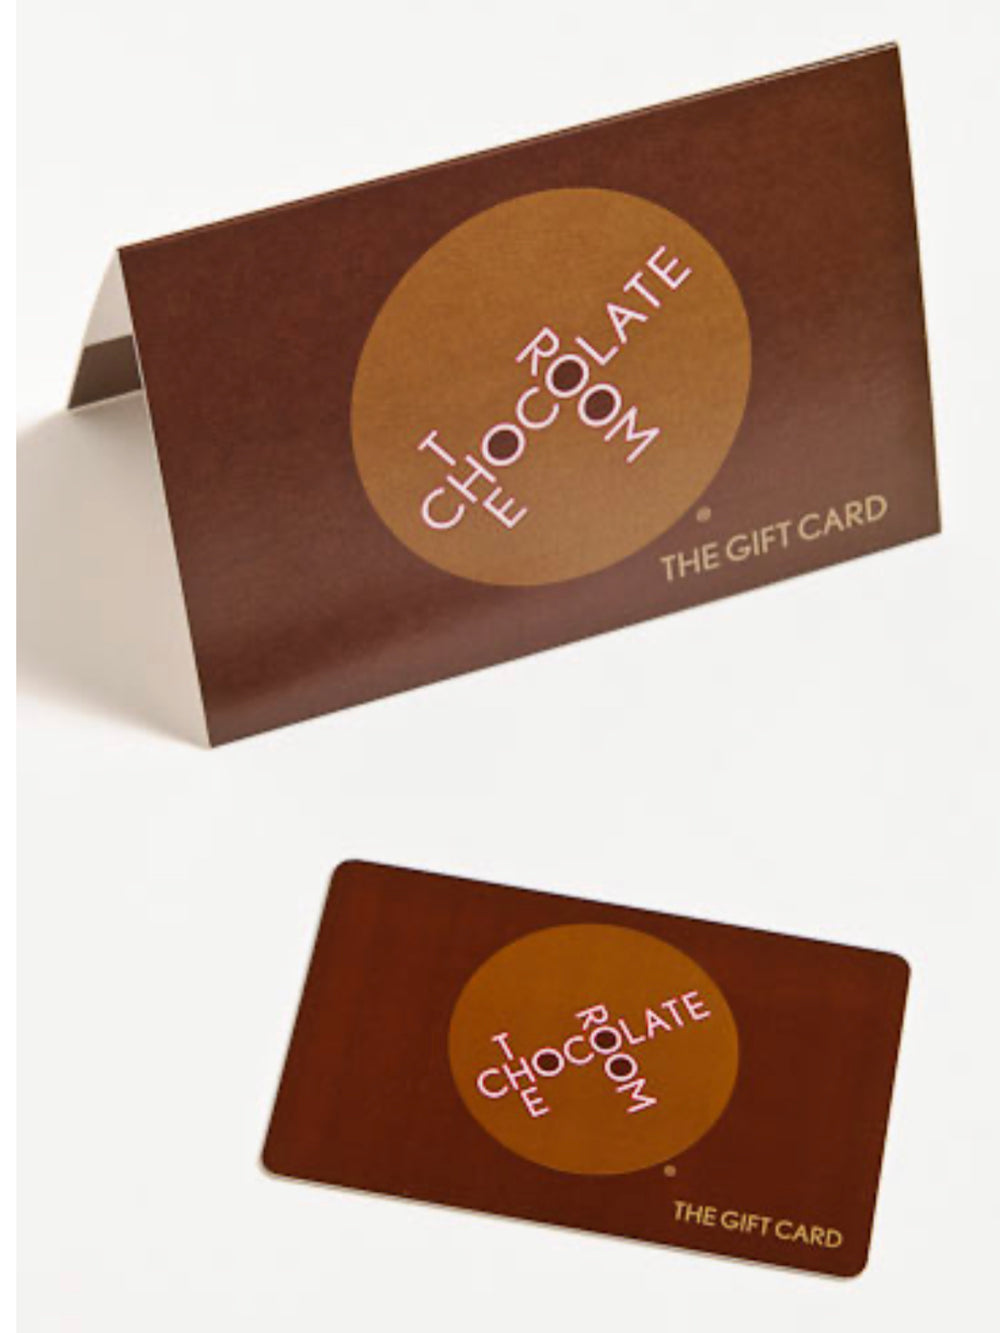 The Chocolate Room gift card is the perfect way to make someones day